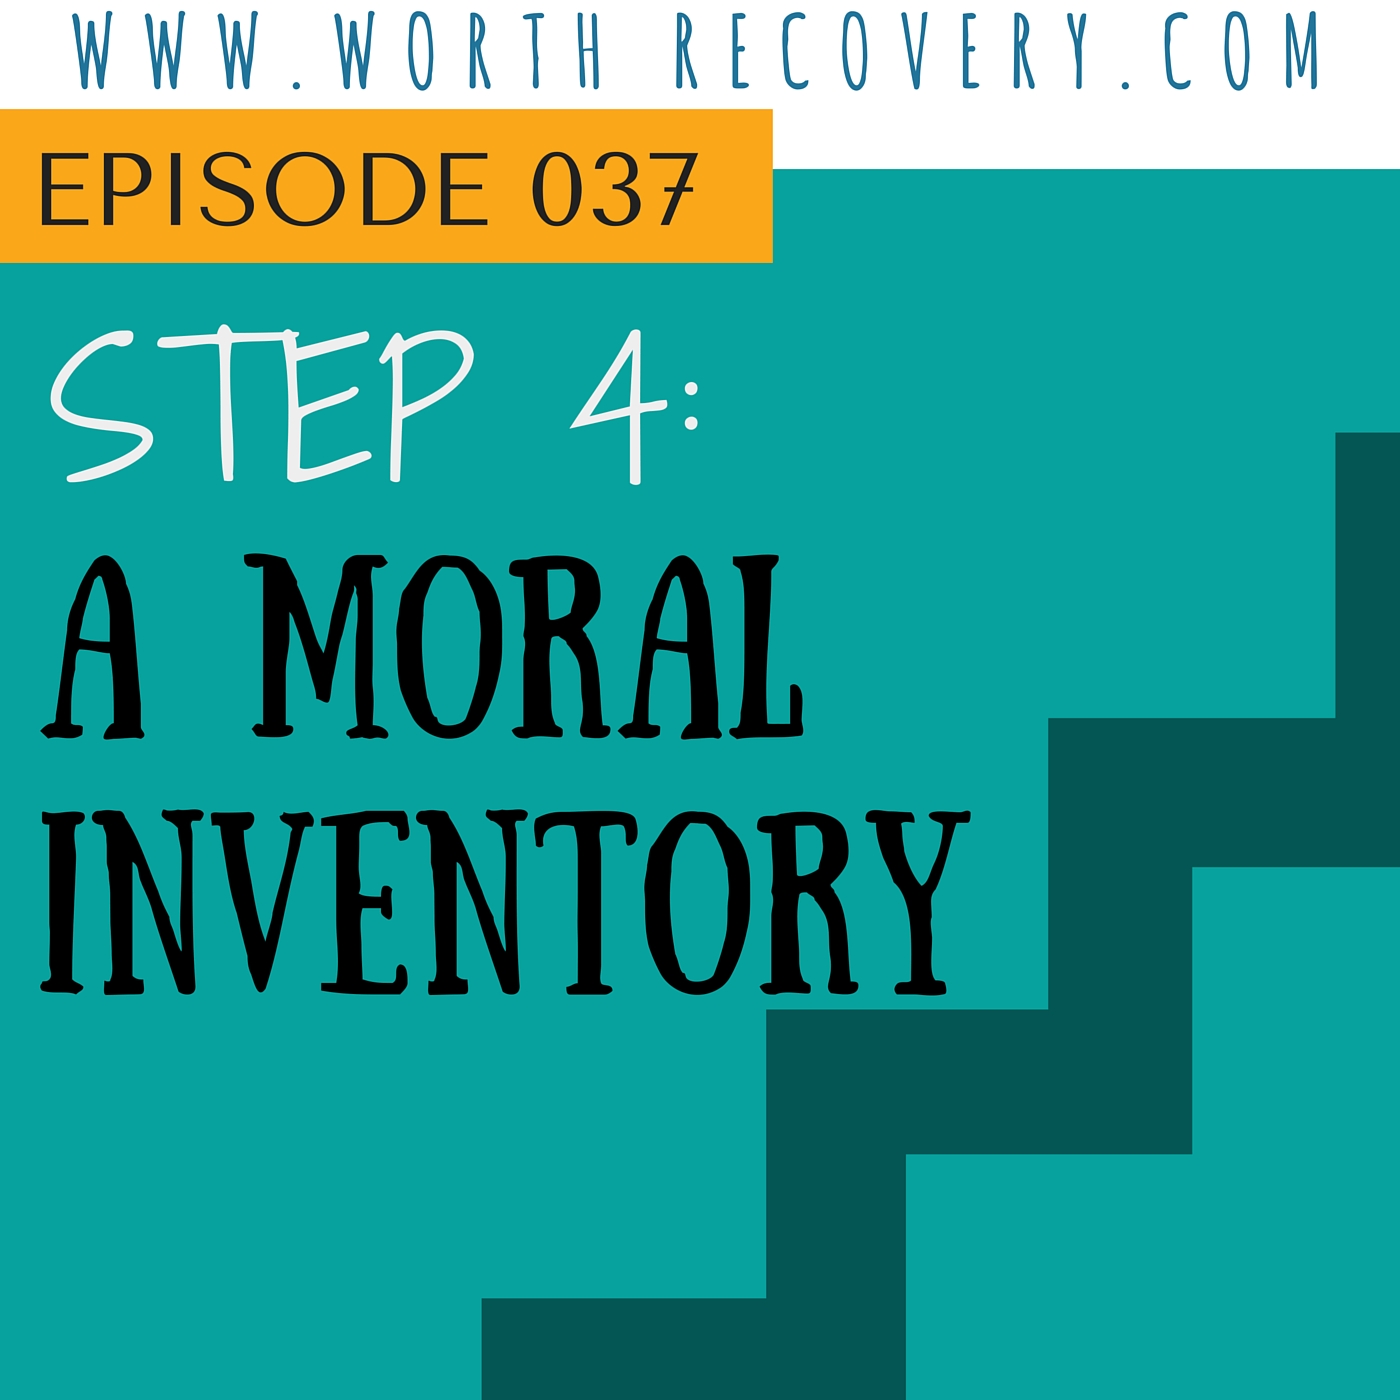 Episode 037: Step 4 - A Moral Inventory